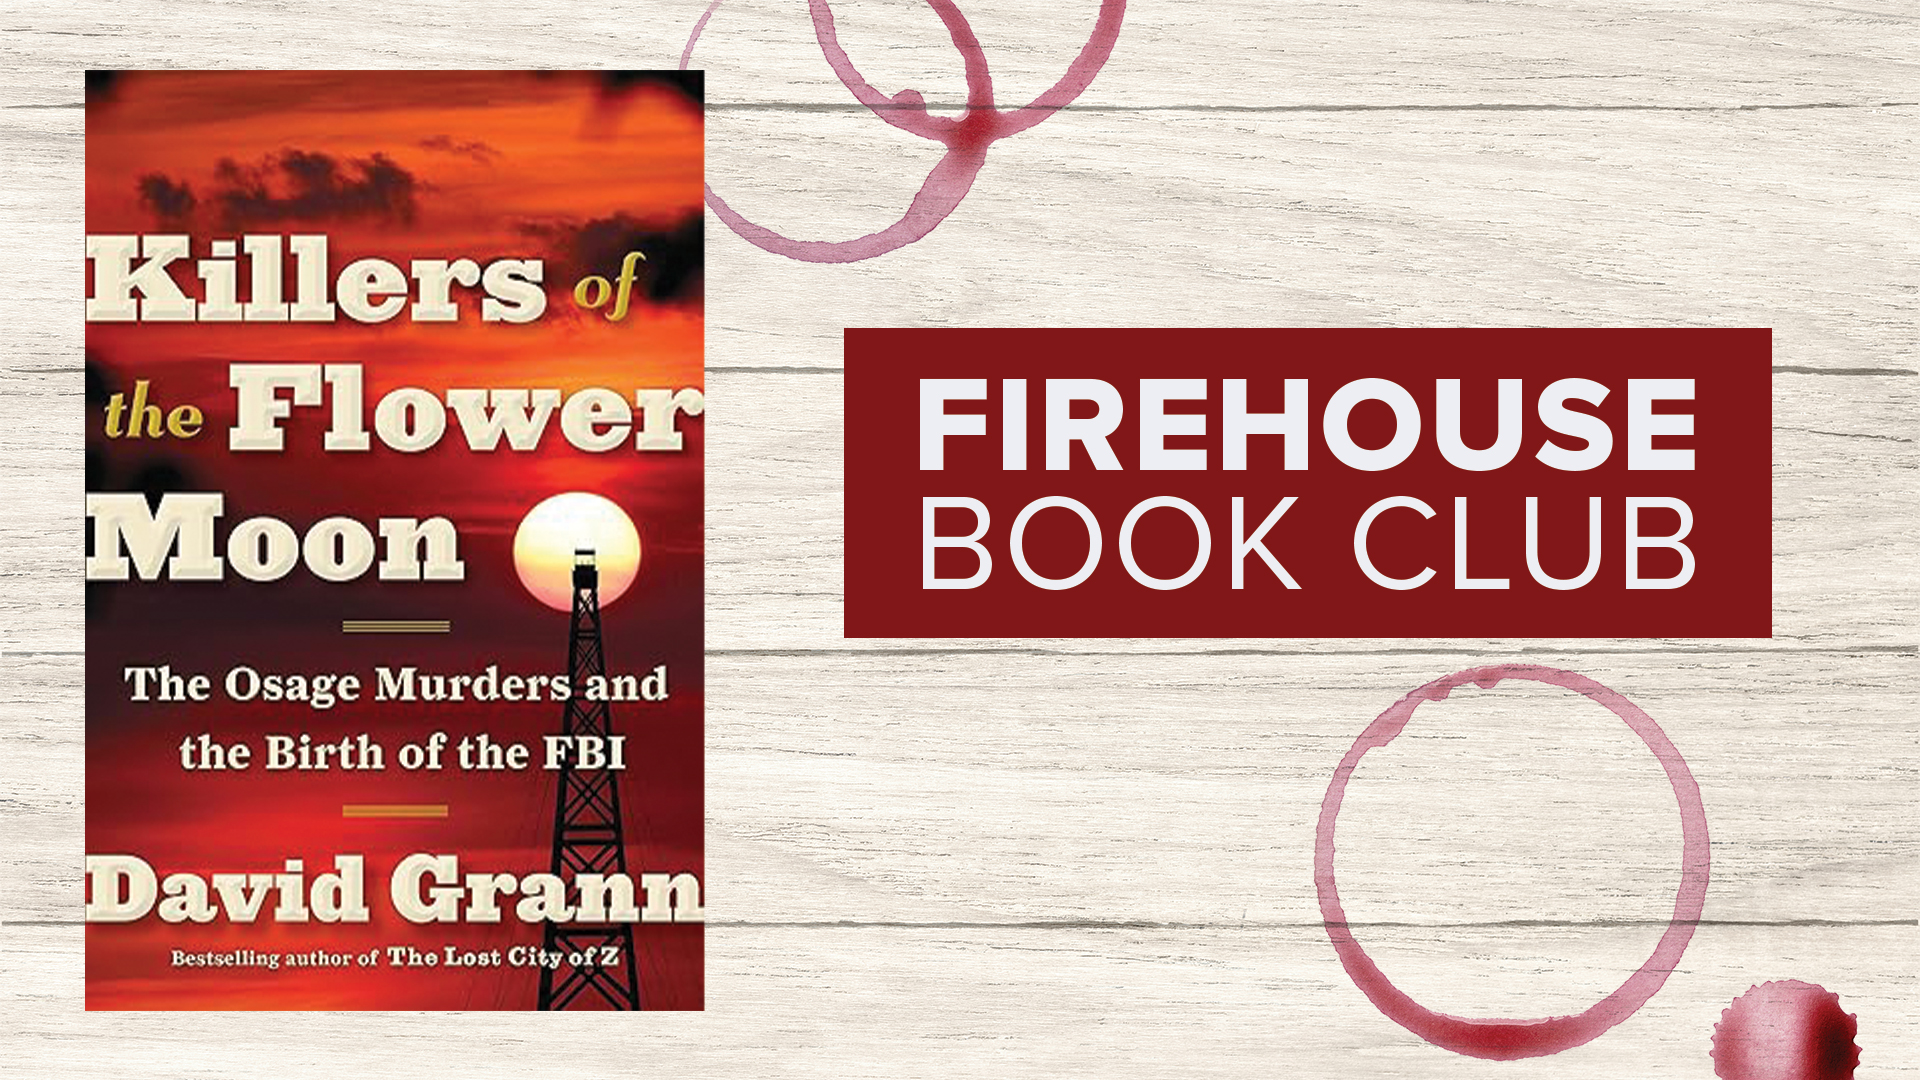 Firehouse Book Club - Killers of the Flower Moon